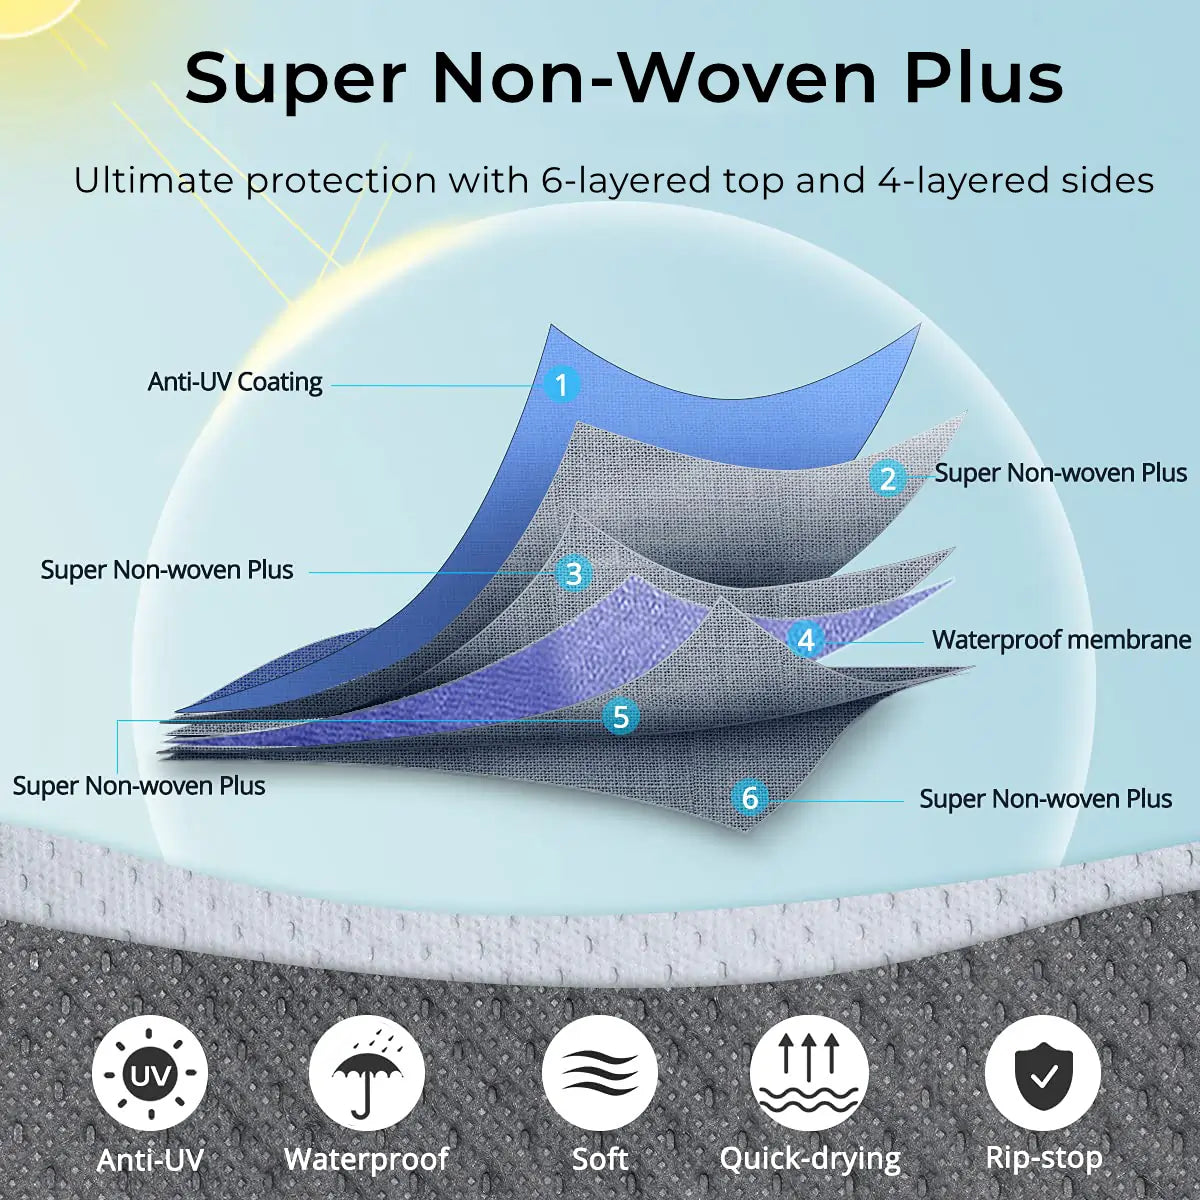 Ultimate protection with 6-layered top and 4-layered sides